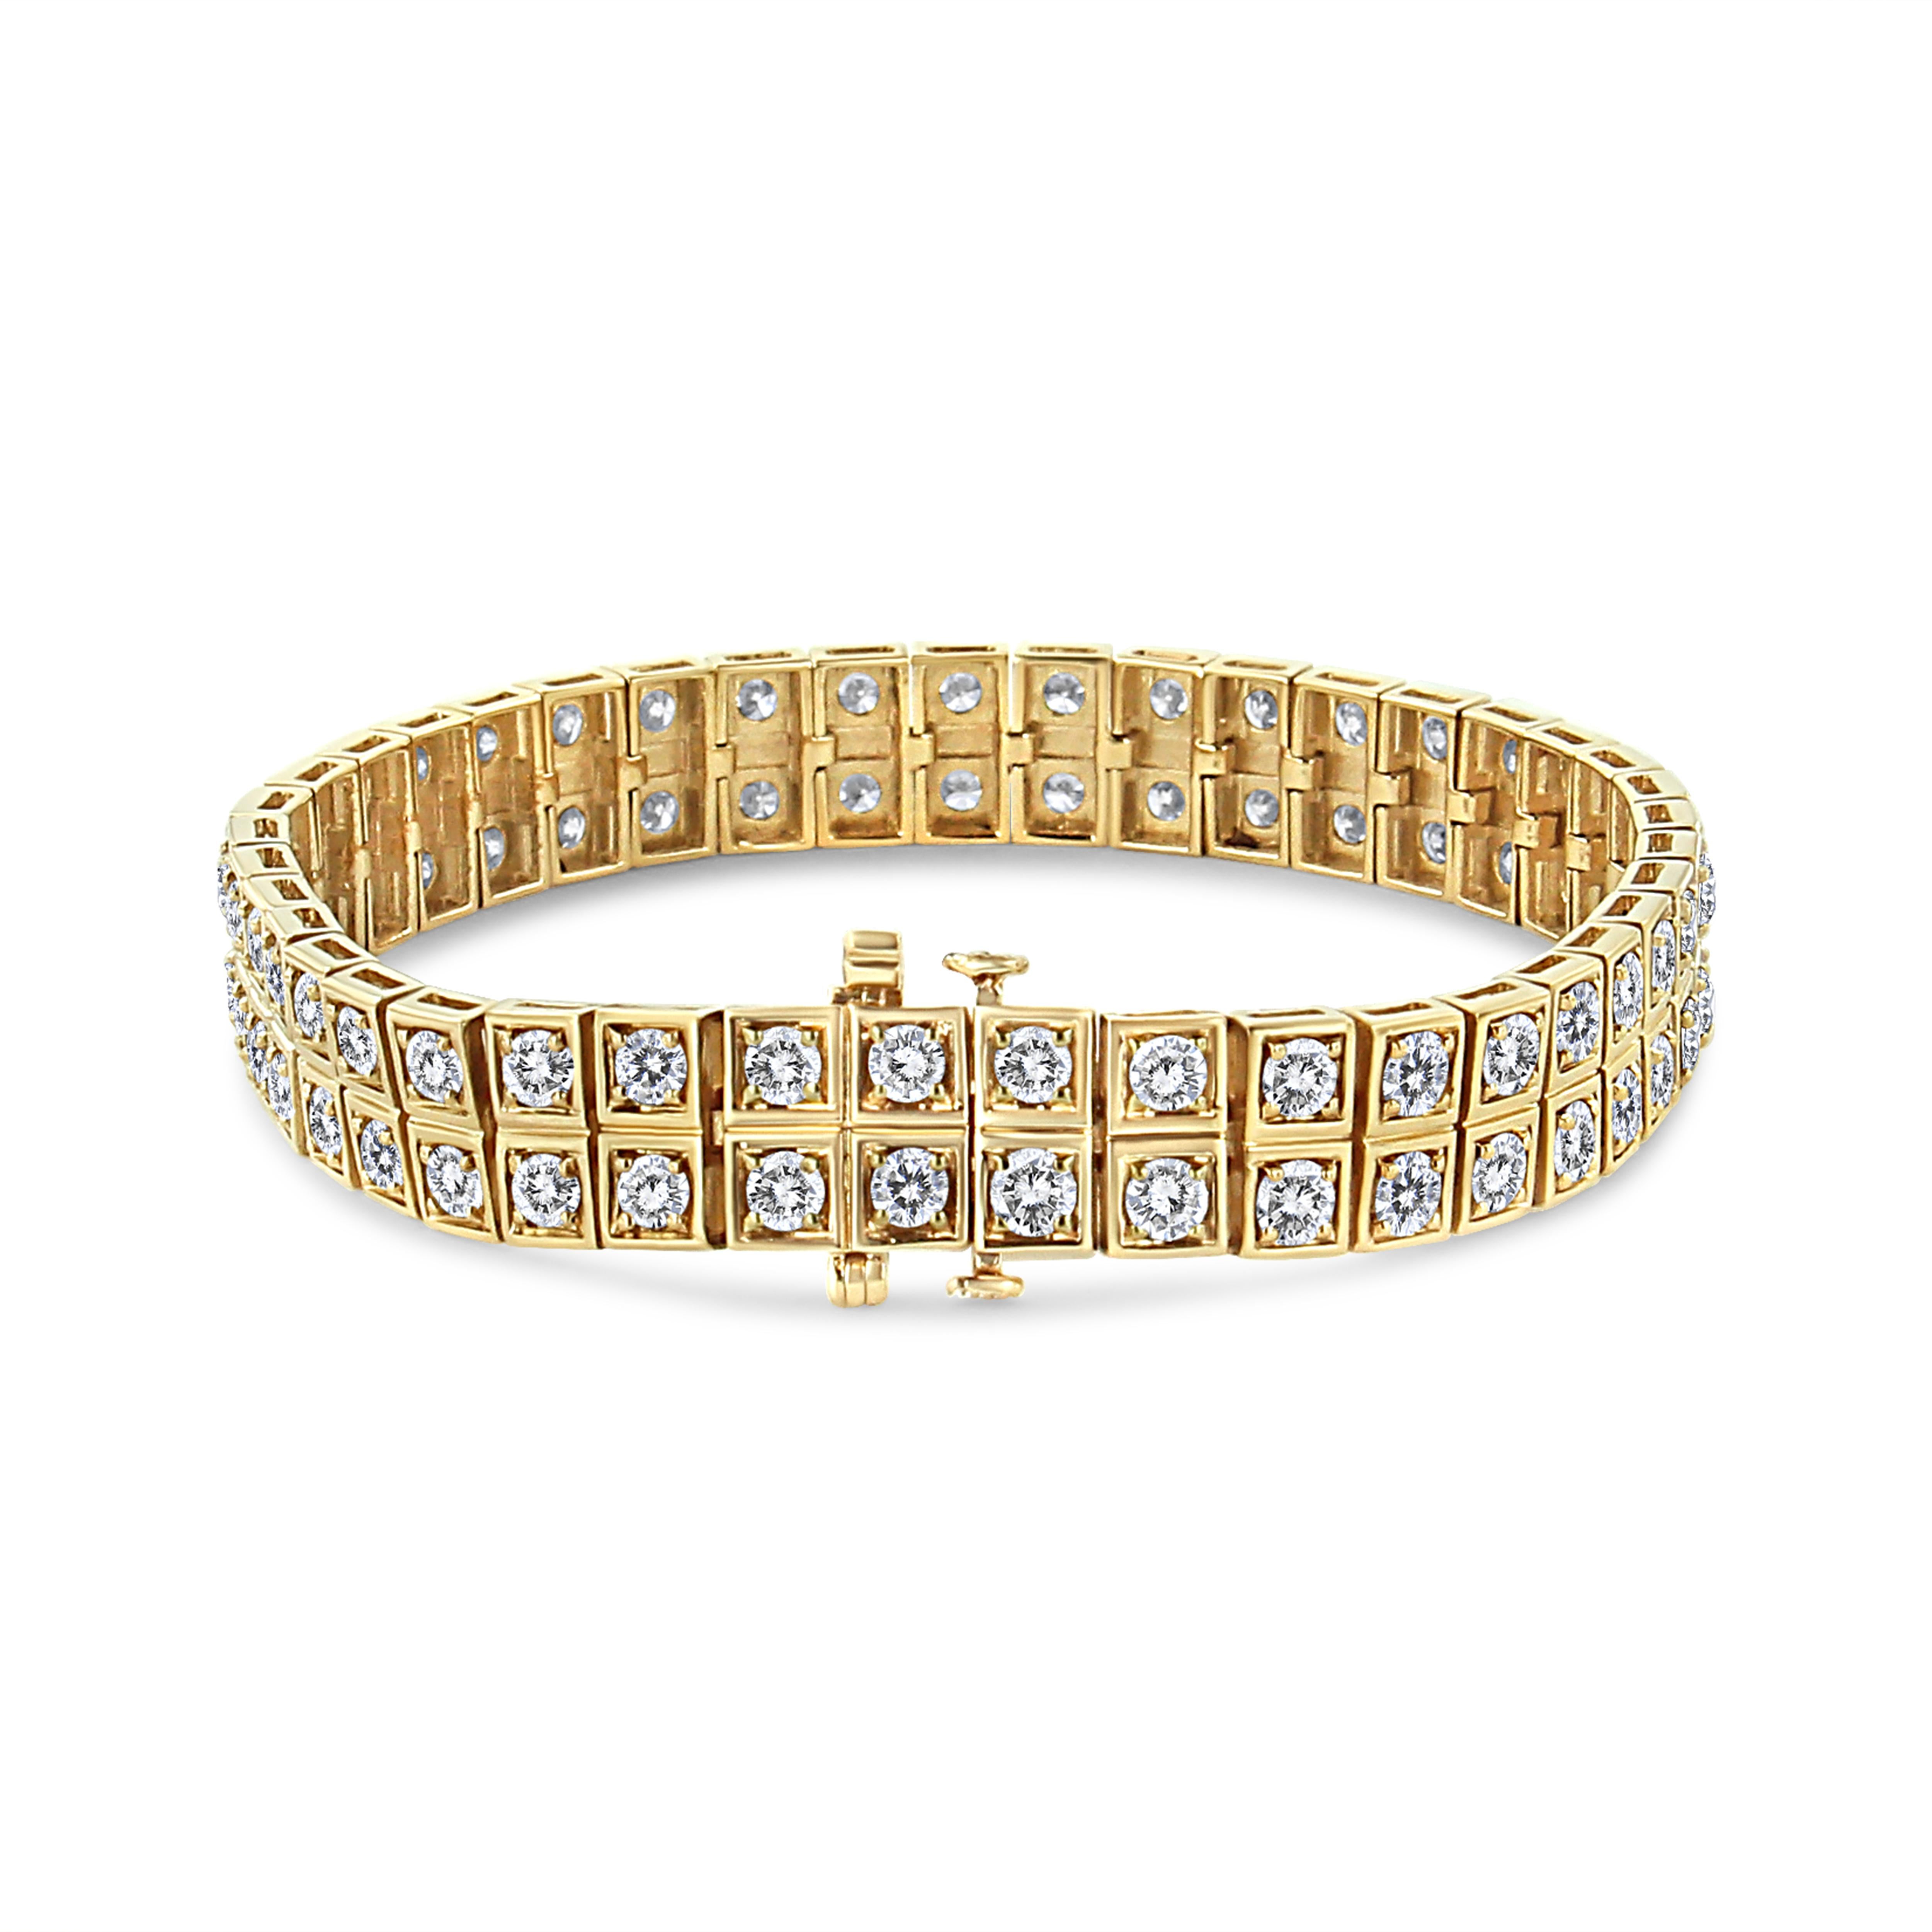 Eye-catching and glamorous, this stunning link bracelet is embellished with a dazzling 8 carats of natural, breathtaking diamonds. Double stacked rows of round-cut diamonds shine in gleaming 10k yellow gold. 8 carats of natural diamonds shine in an